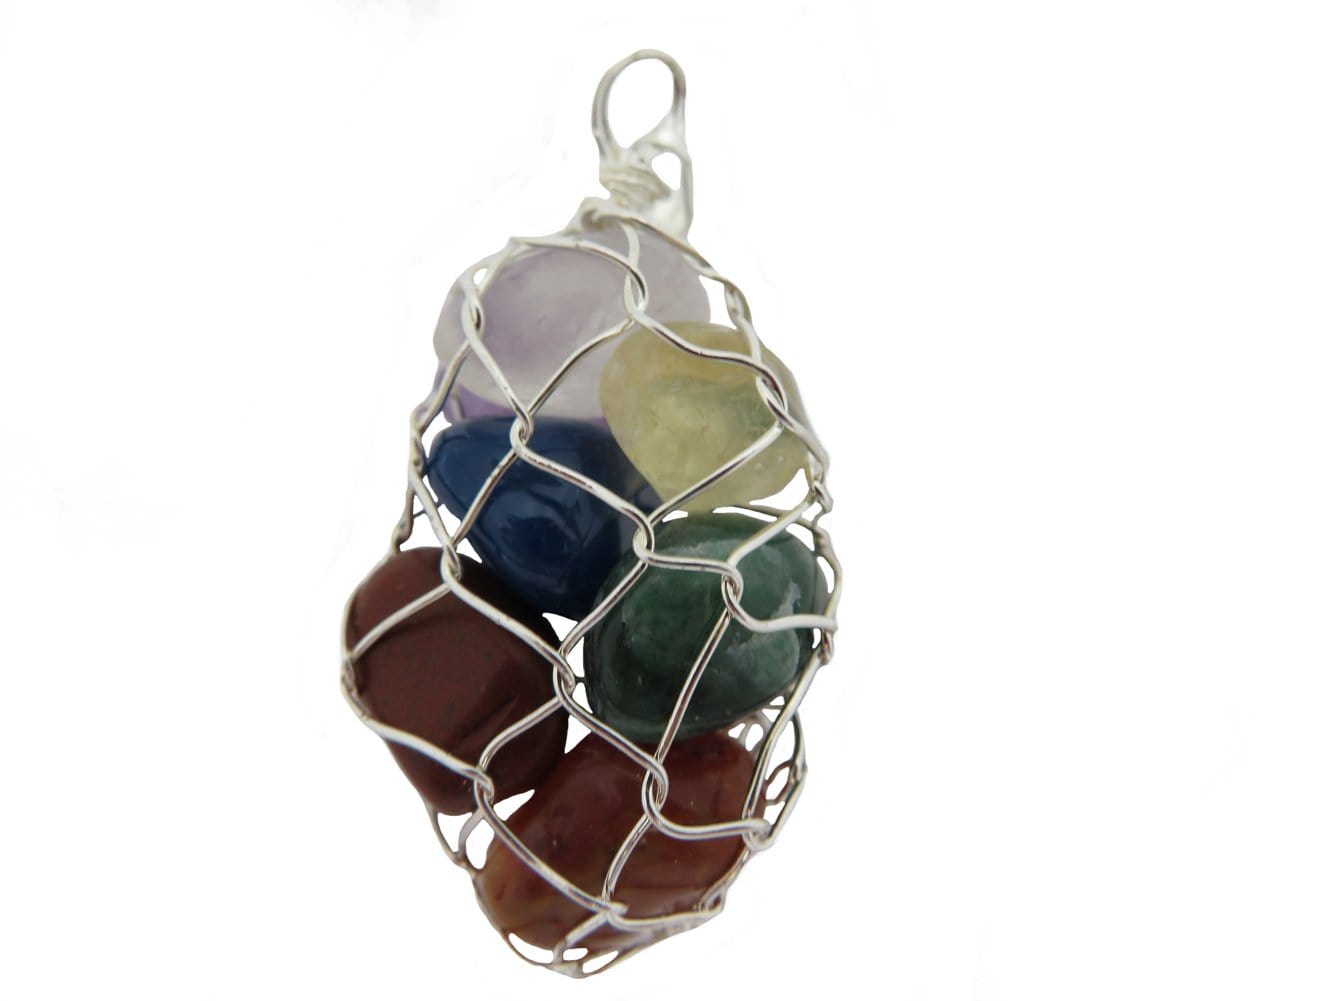 Wired Pendant With Natural 7 Chakra Reiki Healing Stones - silver cage